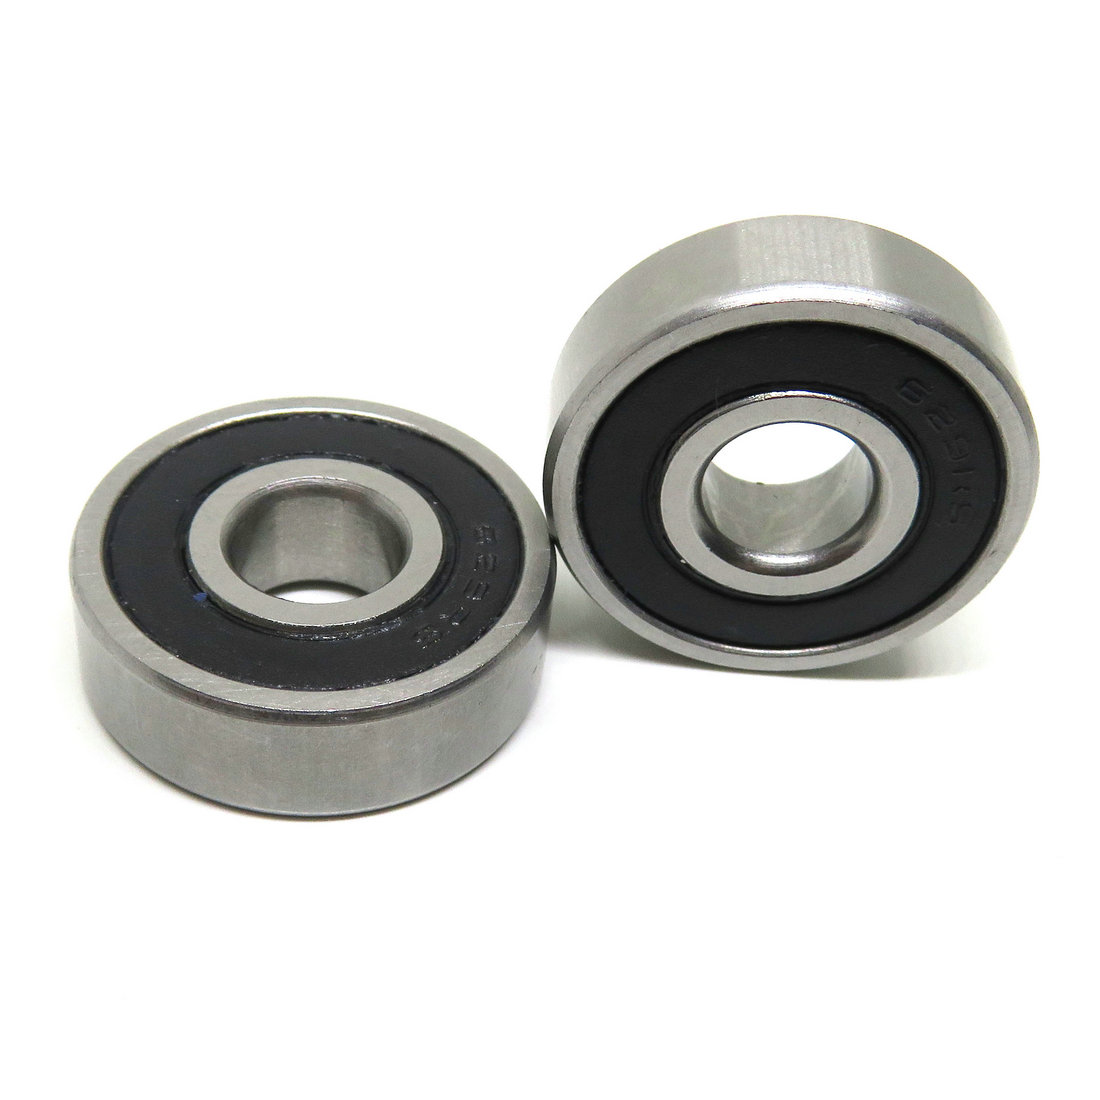 629RS Bearing ABEC-5 9*26*8 mm Miniature Sealed 629-2RS Ball Bearings 629 2RS For Electric Motor.jpg